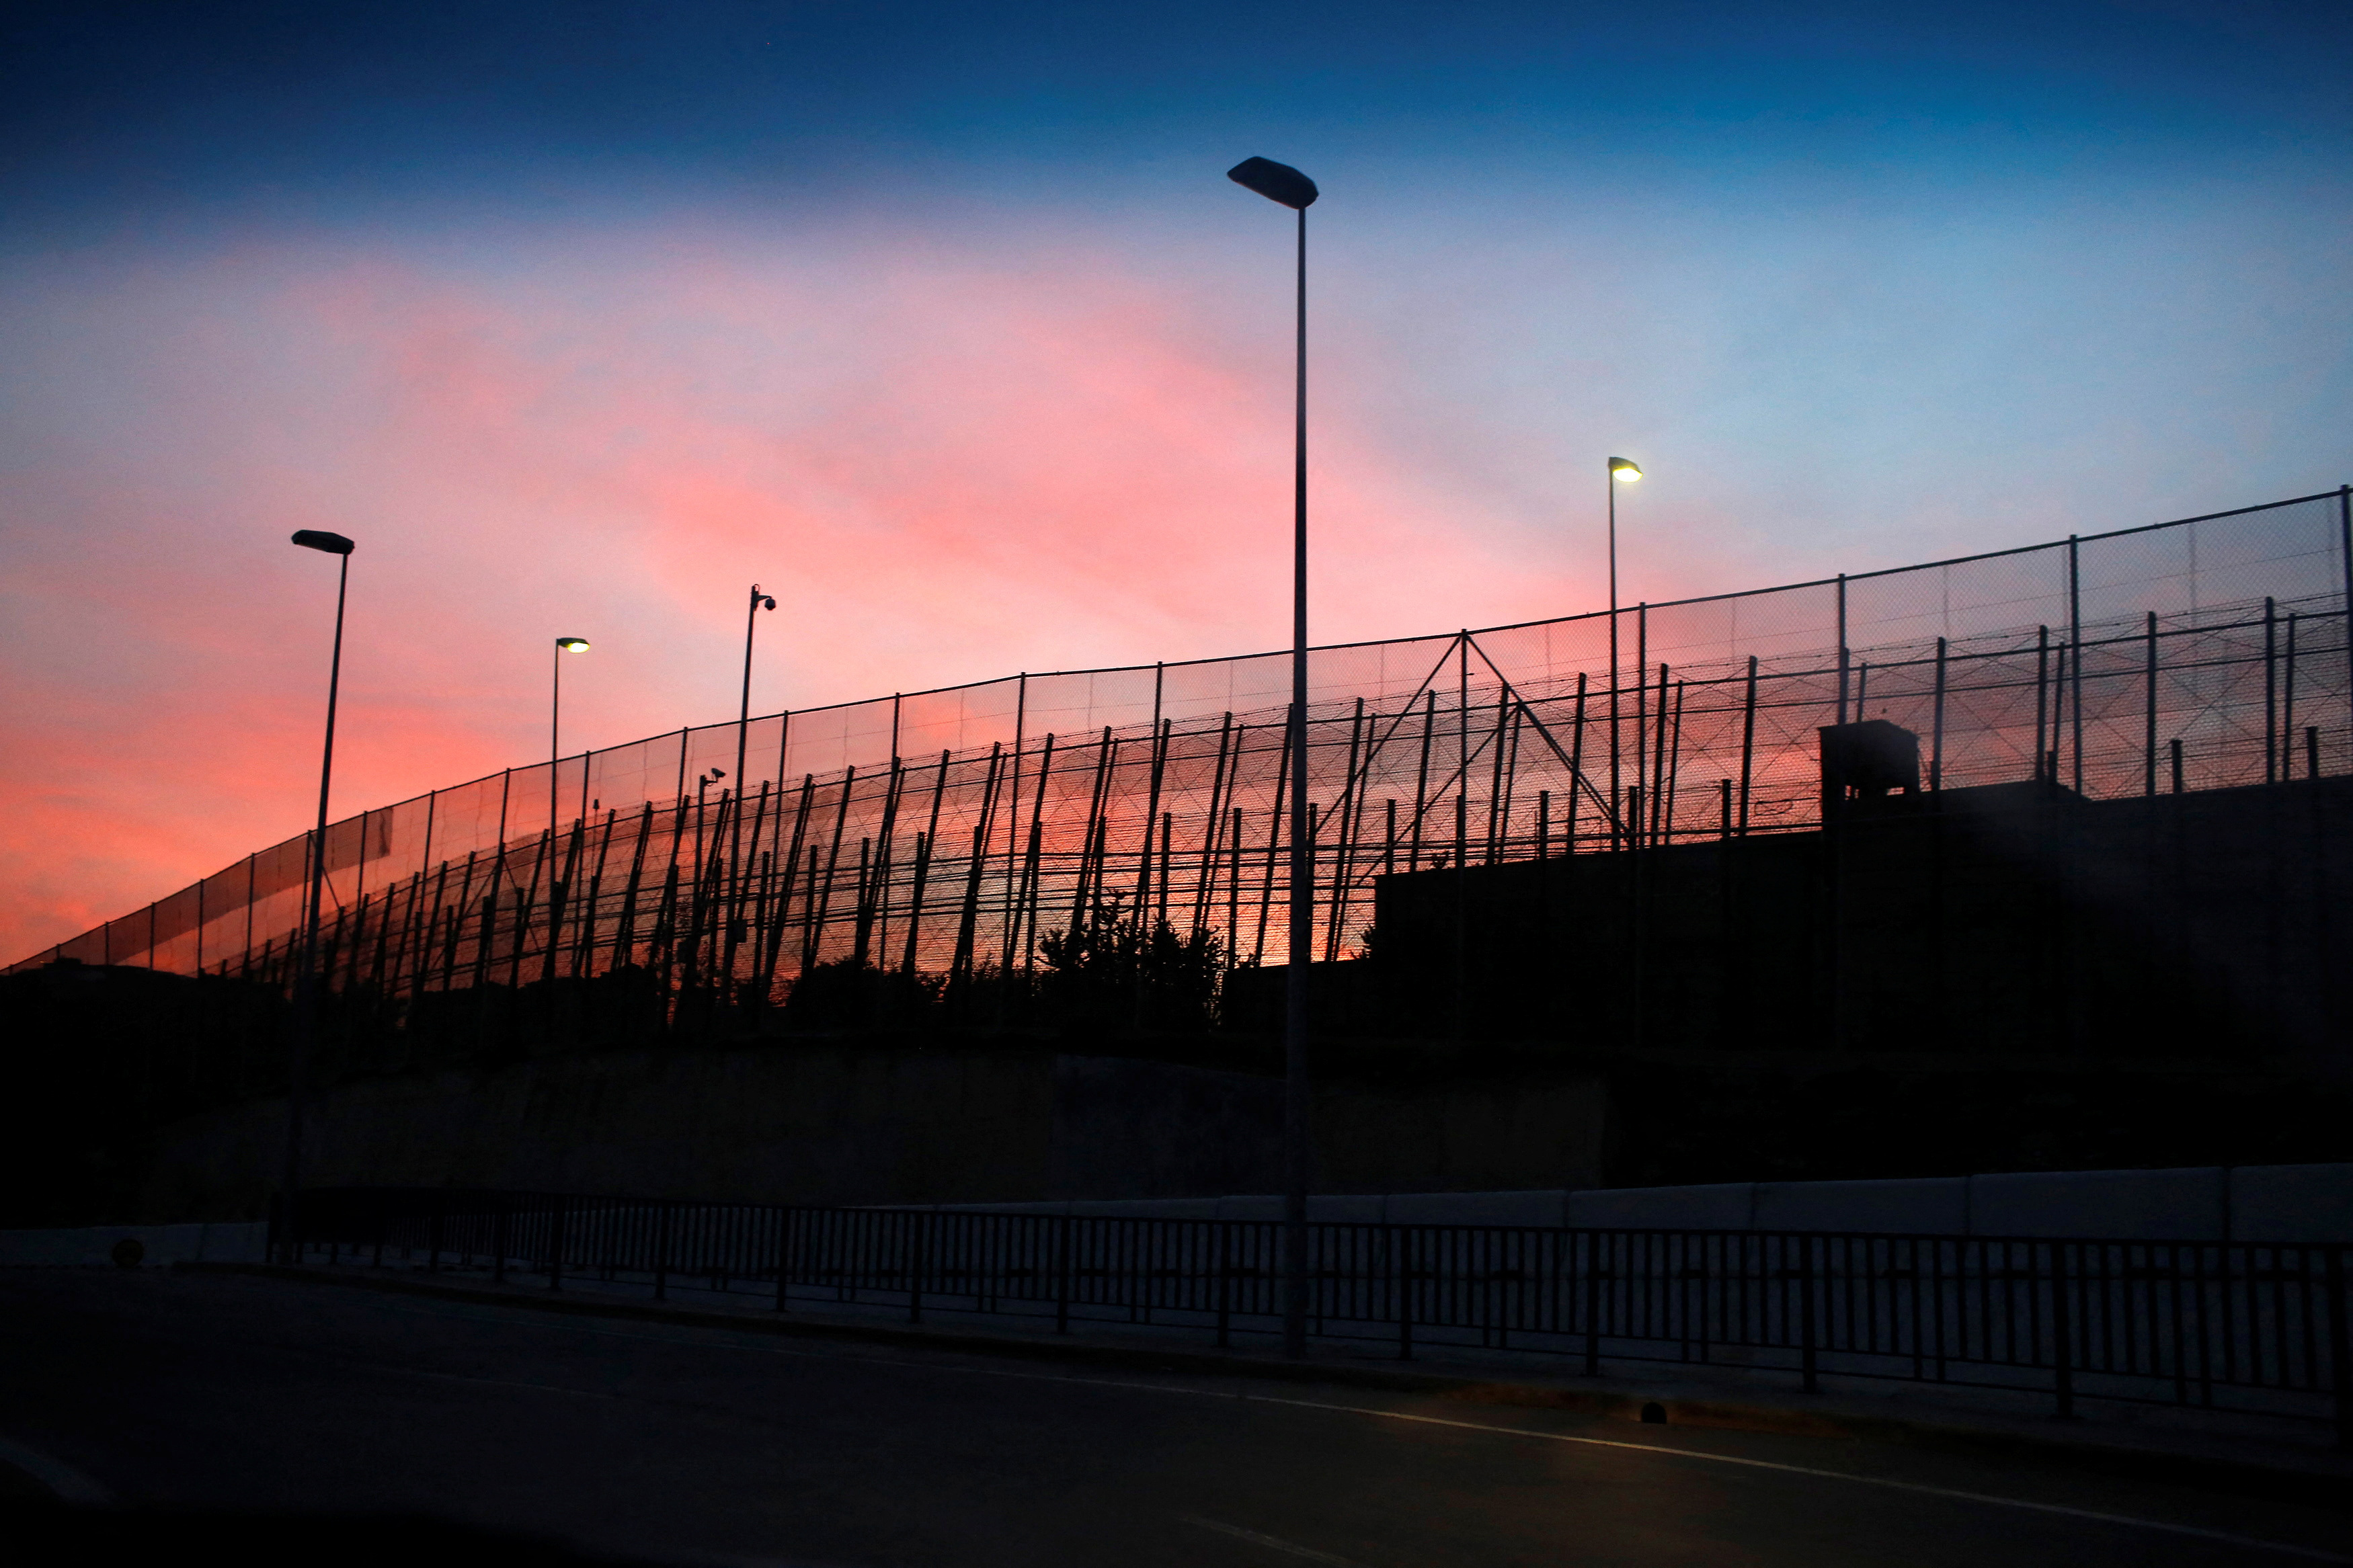 The border fence between Morocco and Spain's north African enclave Melilla is seen along a road